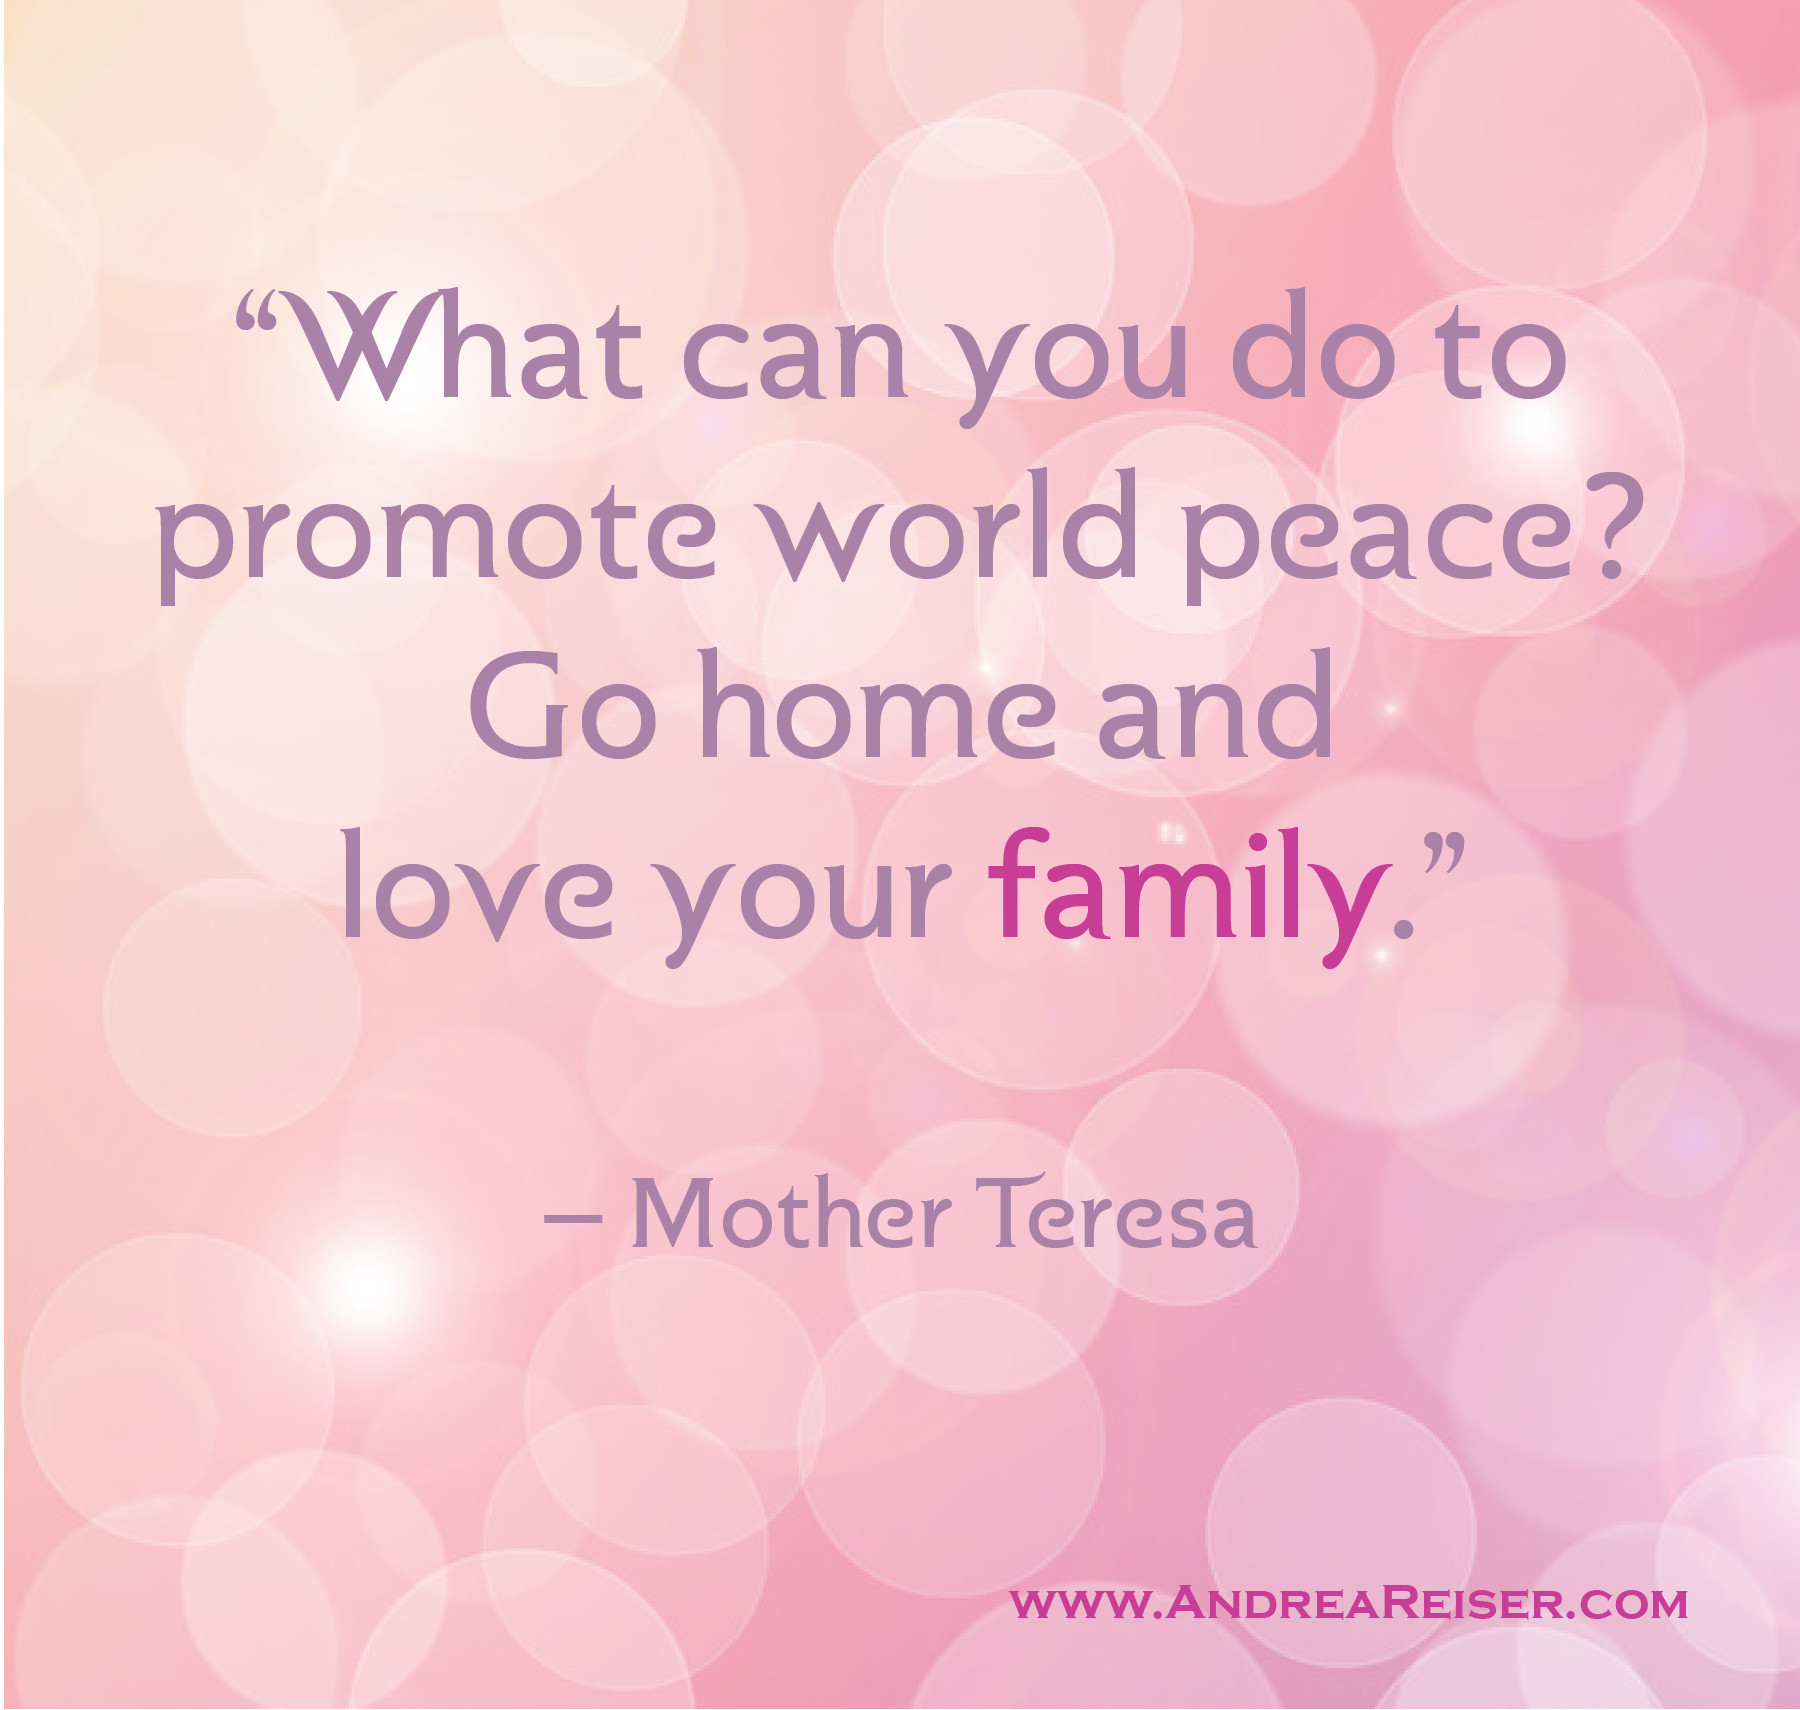 Mother Teresa Quotes On Family
 Mother Teresa Quotes About Family QuotesGram